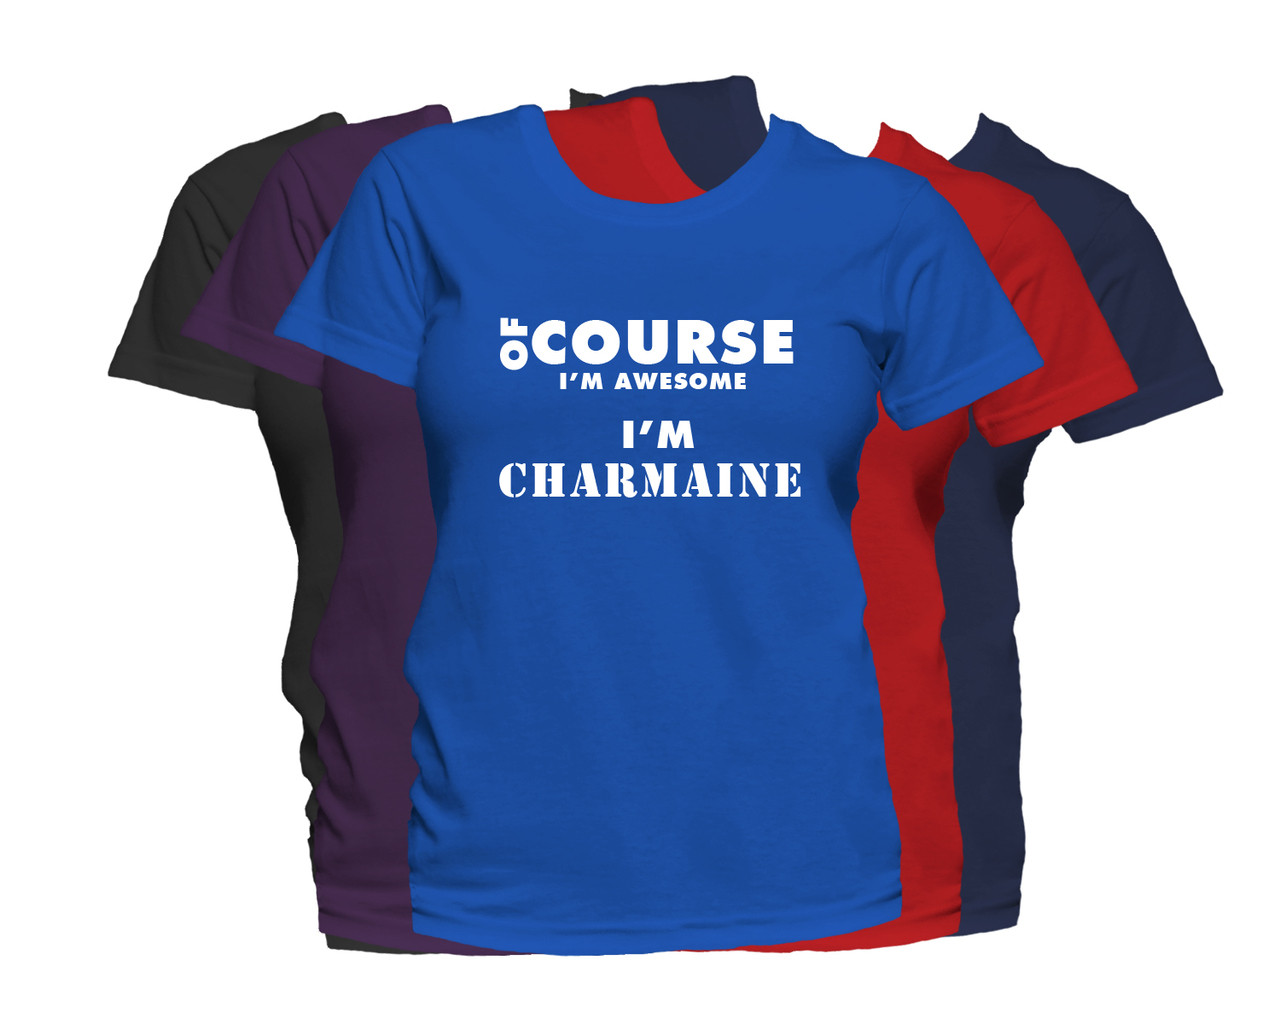 CHARMAINE First Name T Shirt Of Course I'm Awesome Personalized Custom  Women's First Name Shirt - Fat Duck Tees